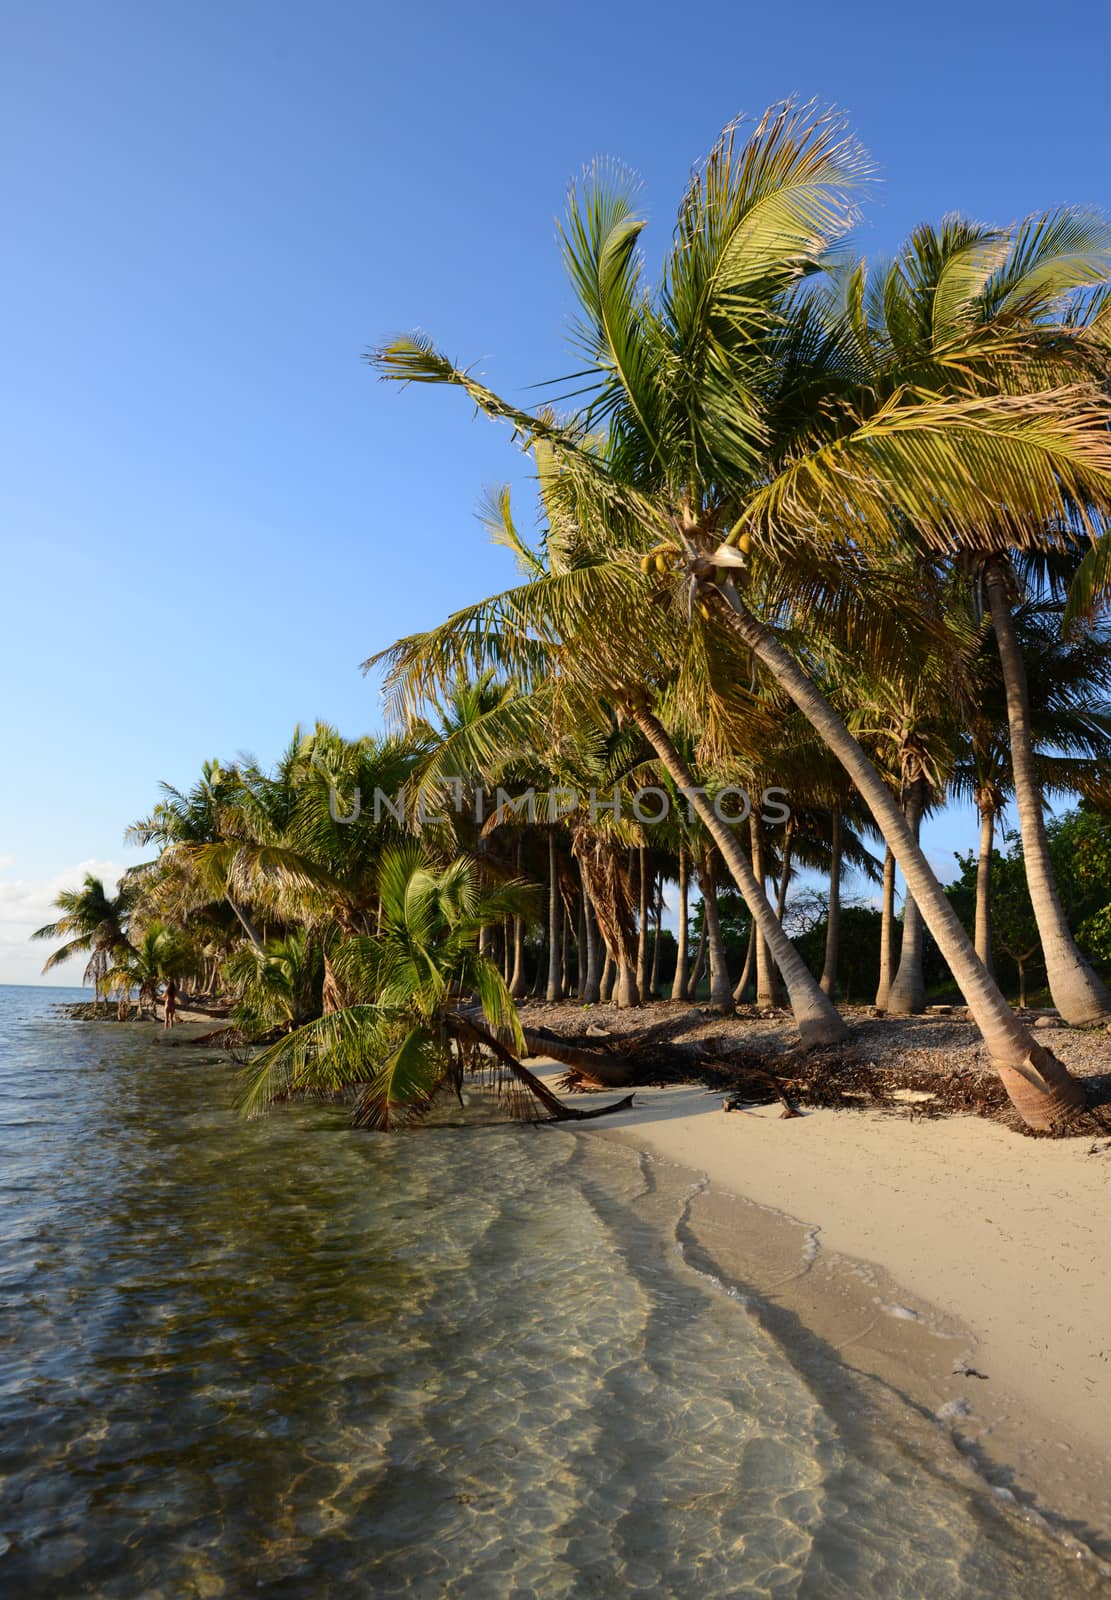 Untouched tropical beach lined with palm trees by ftlaudgirl